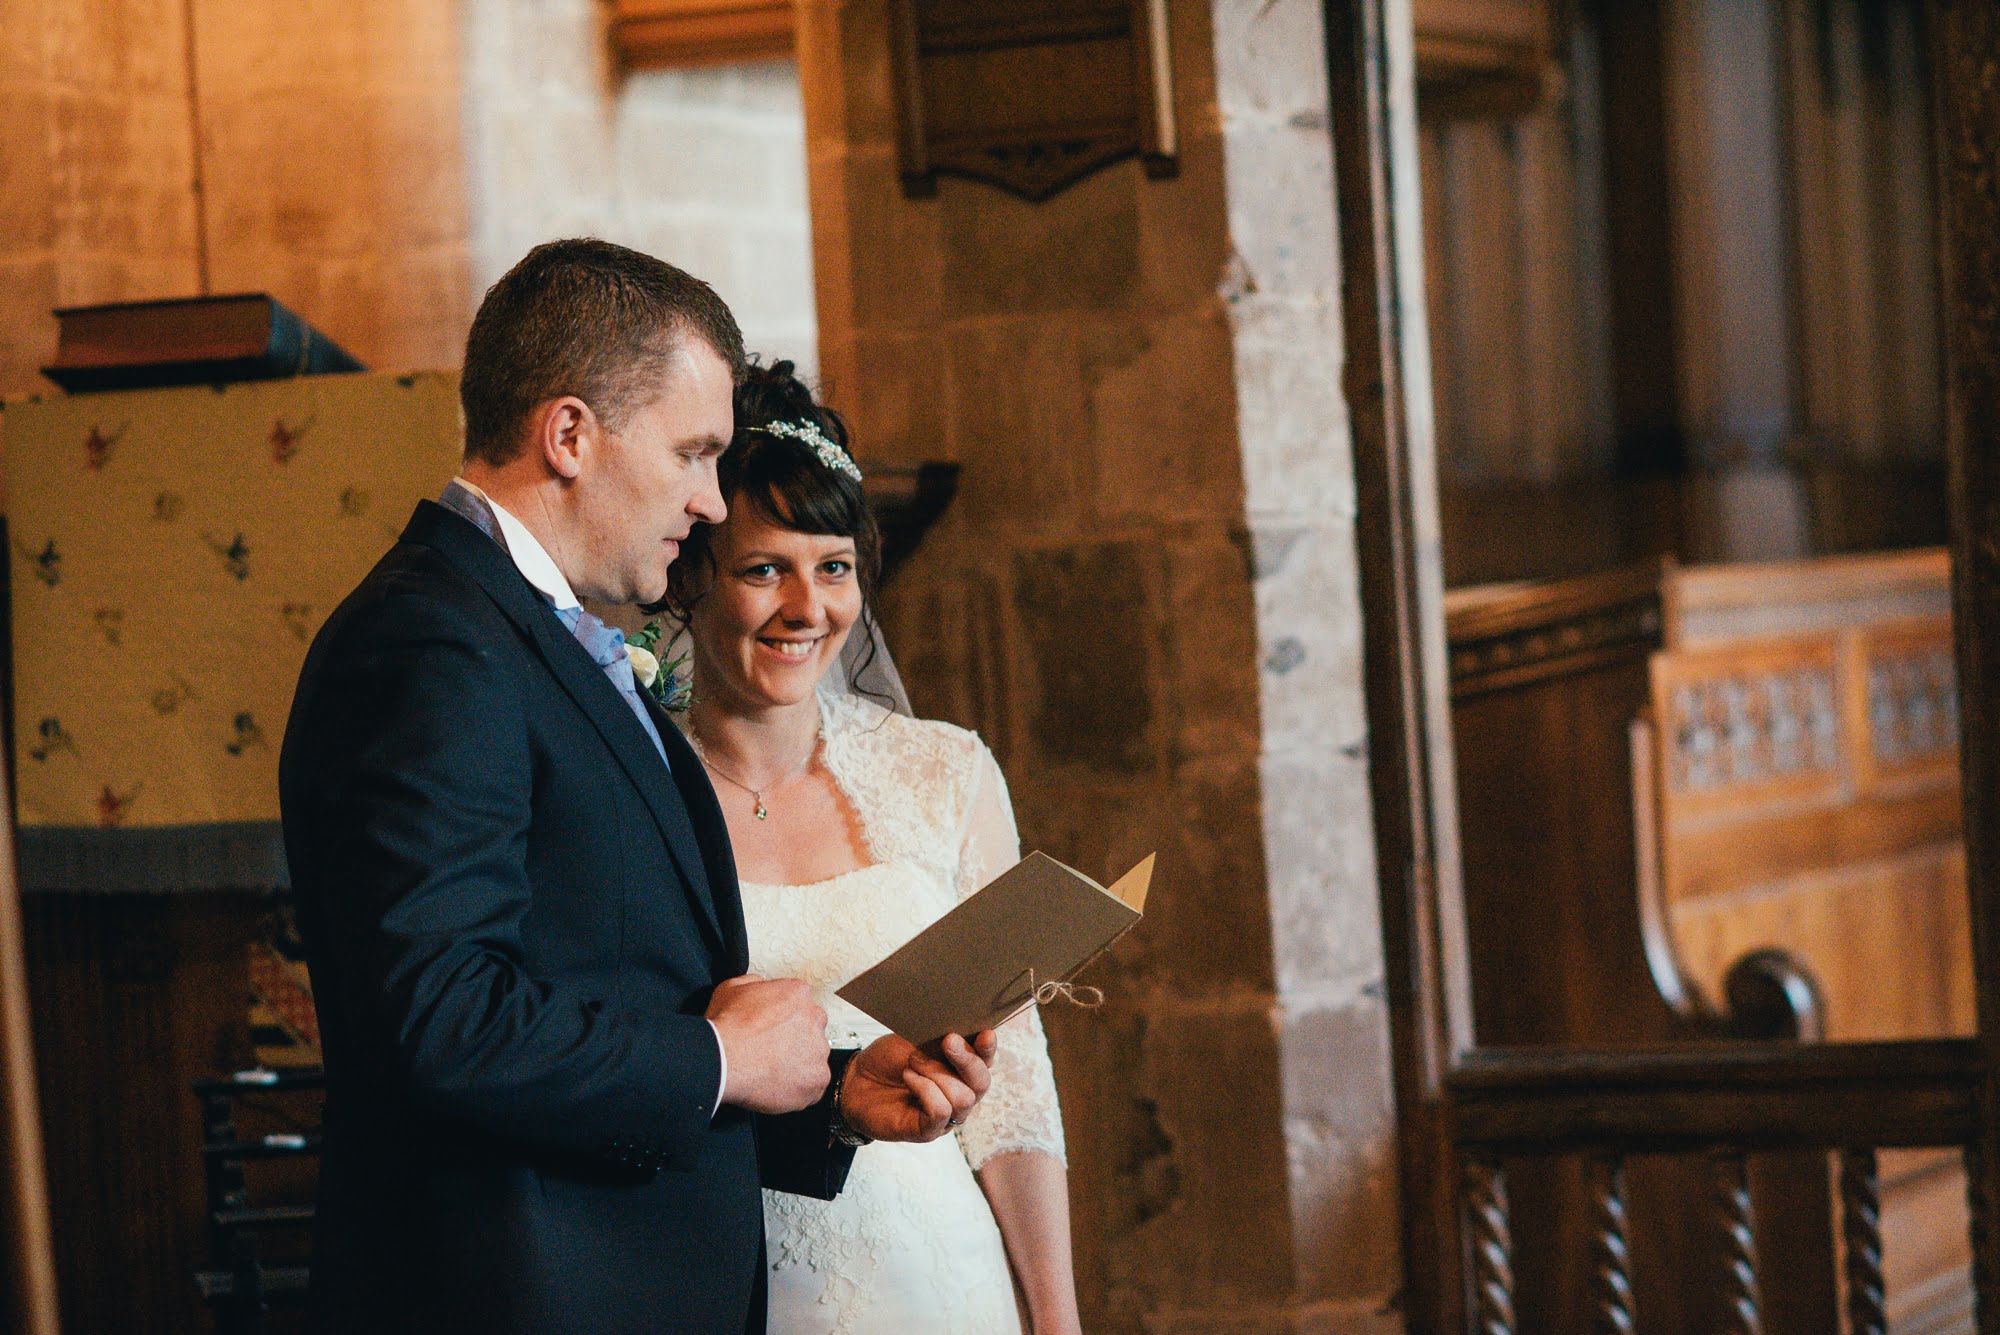 Rustic wedding at How Caple Court by Hereford Wedding Photographer